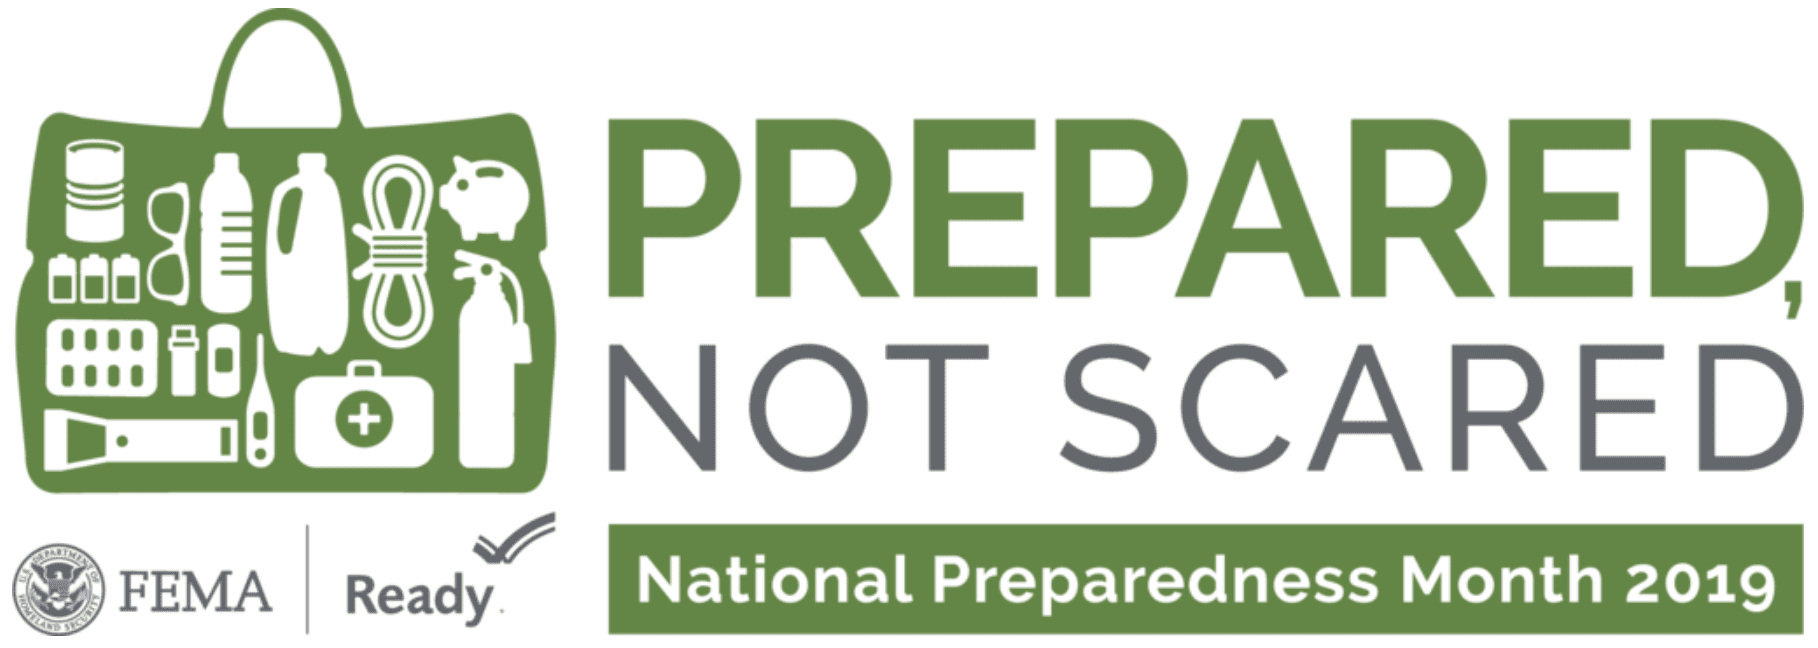 Evaluate Your Readiness During National Preparedness Month: Save Early for Disasters Homeland Security Today